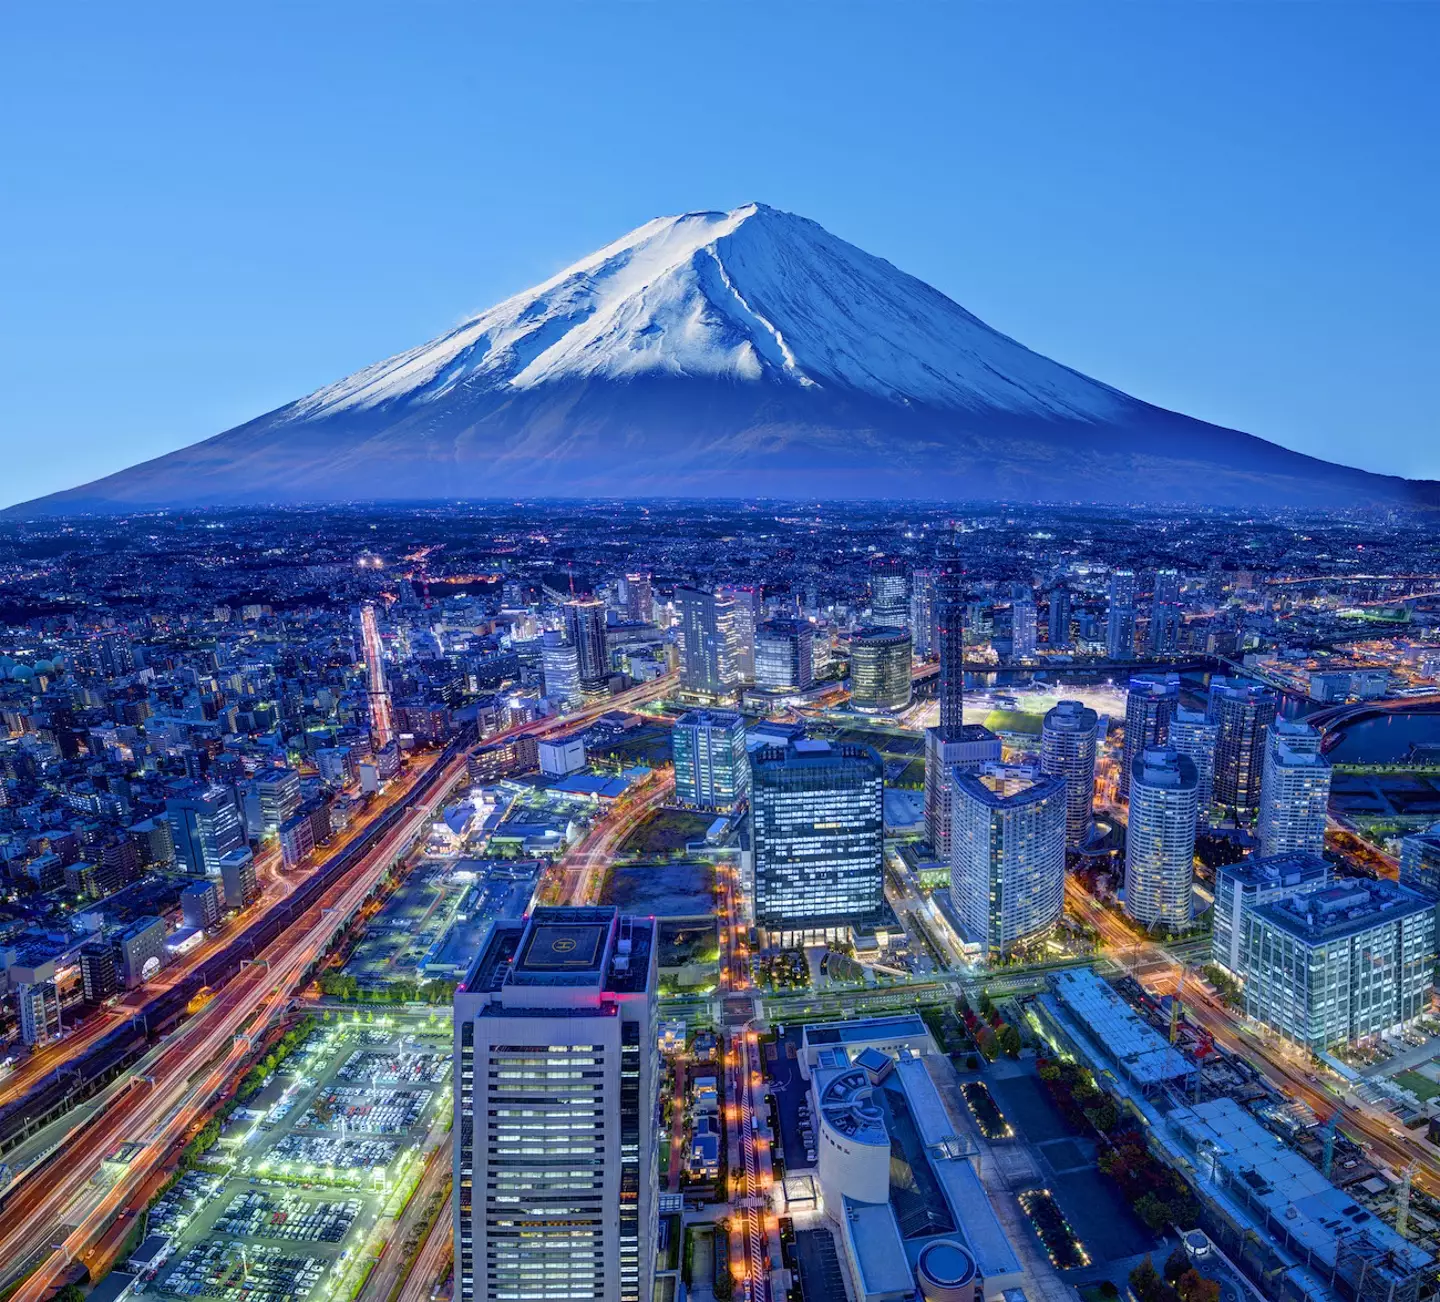 Japan happens to be the eleventh most populous country in the world.